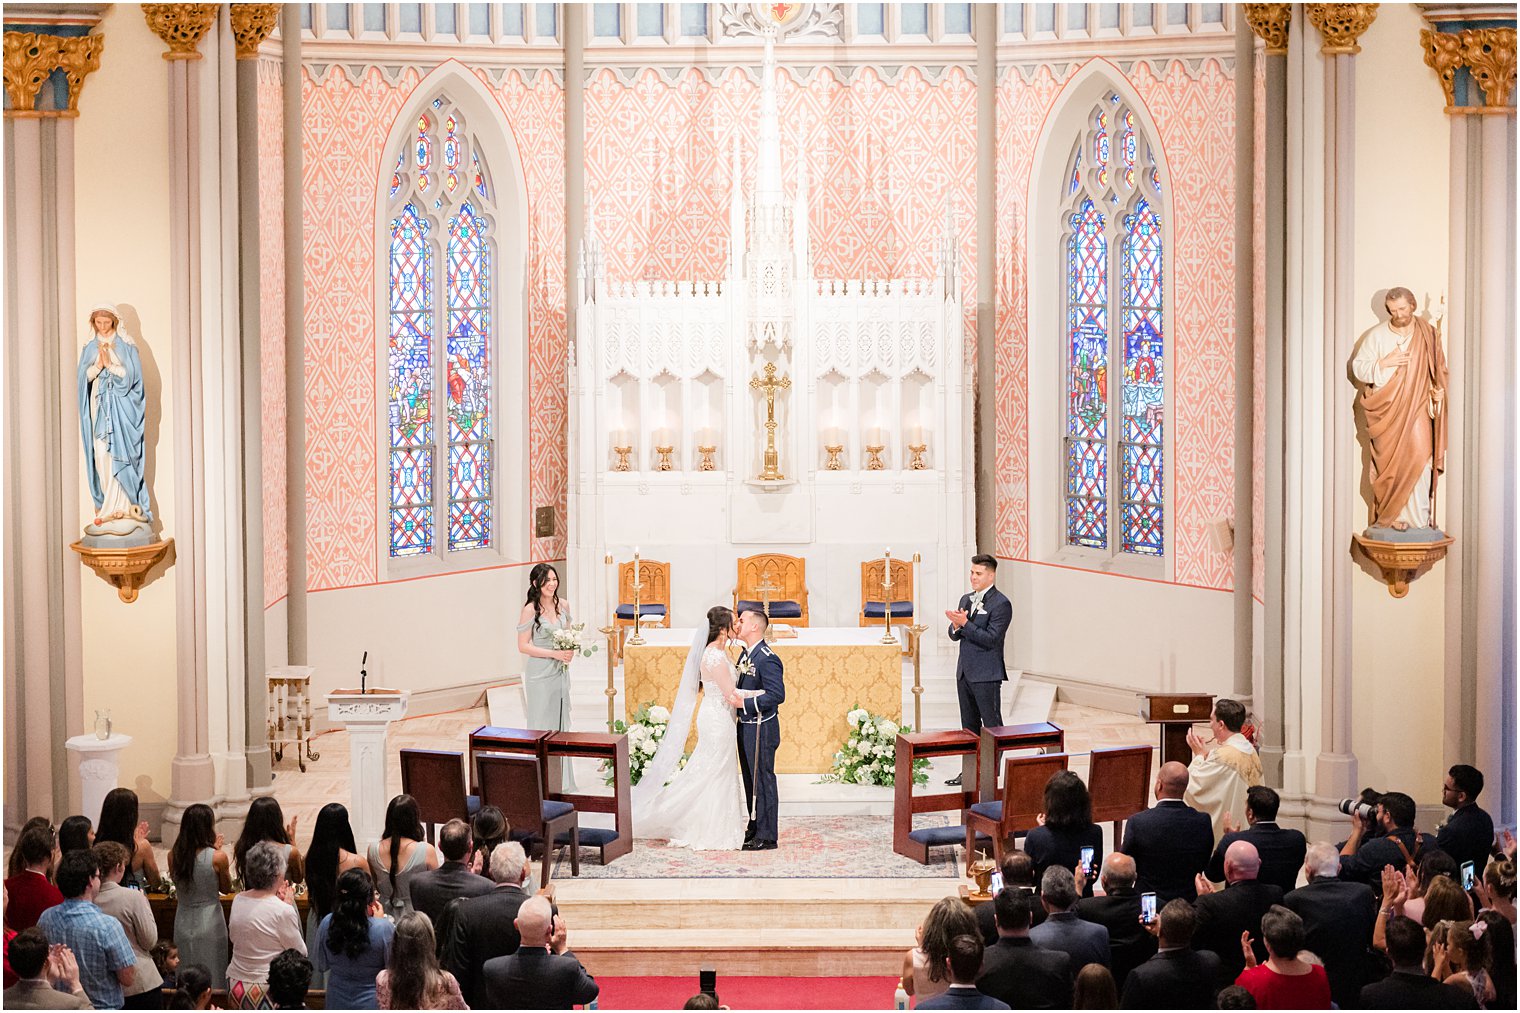 newlyweds kiss by alter during wedding ceremony at St. Peter's Catholic Church